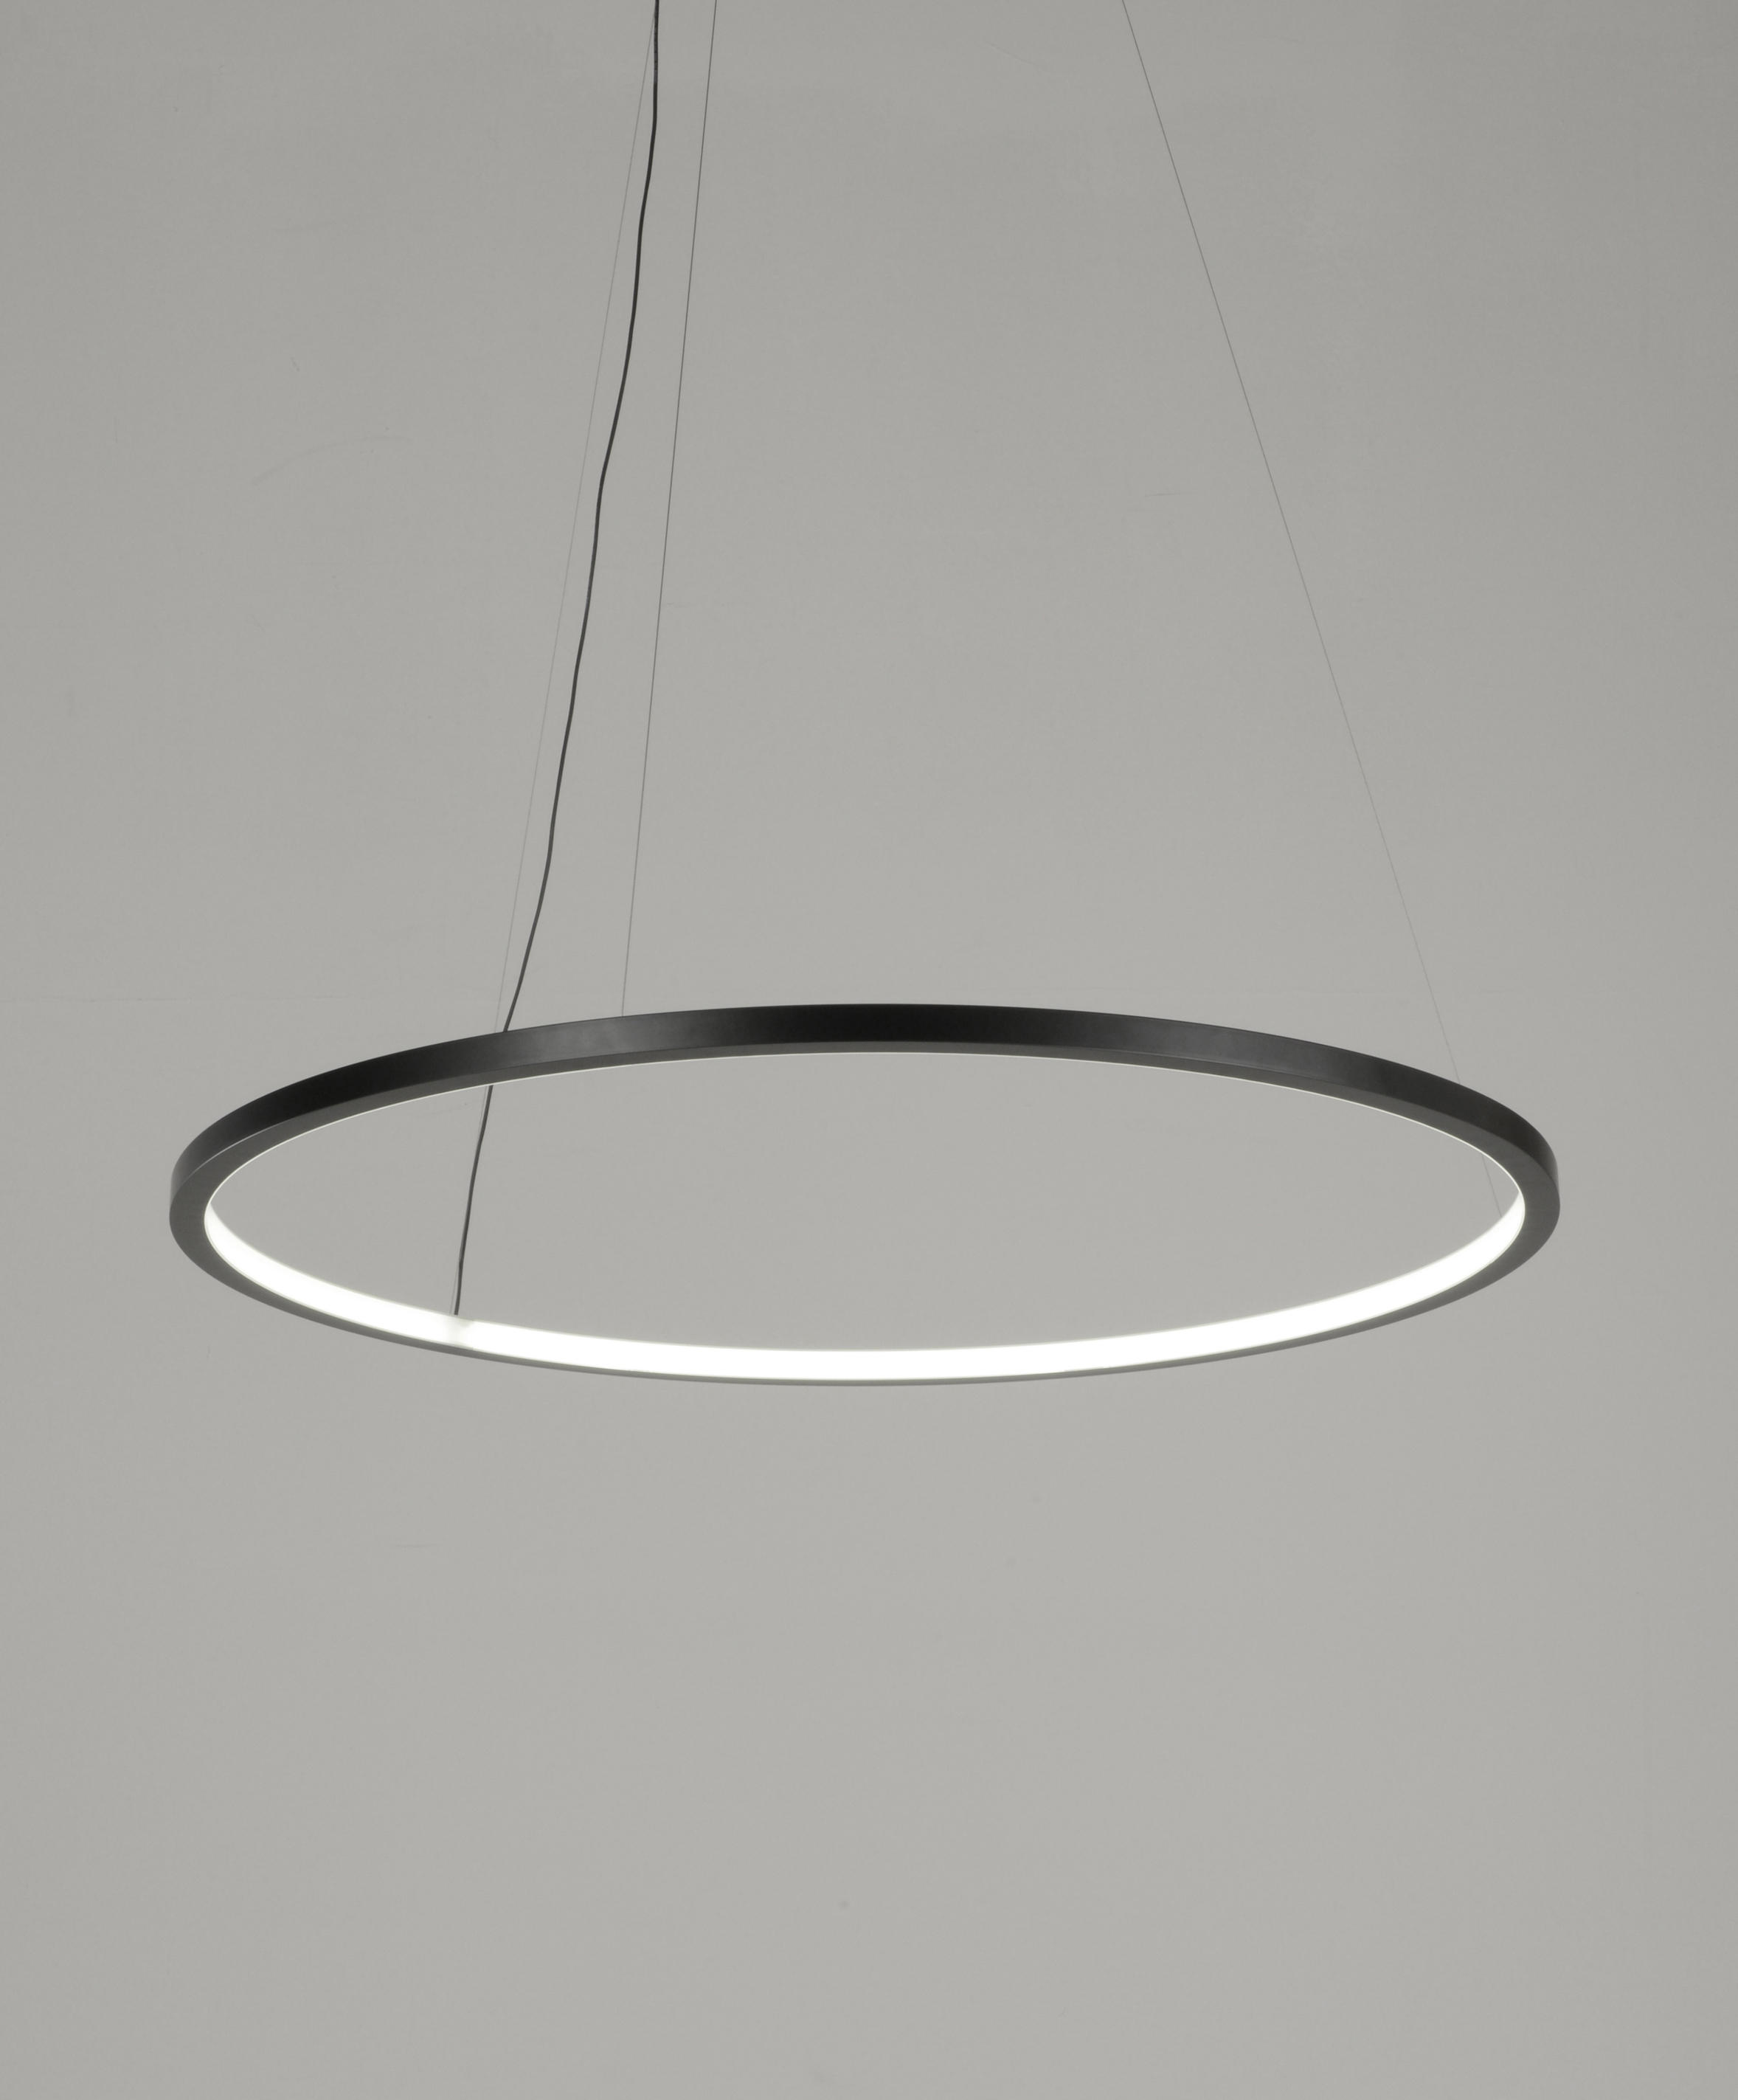 CIRCUS S1000 ROUND LIGHT - General lighting from &'Costa | Architonic